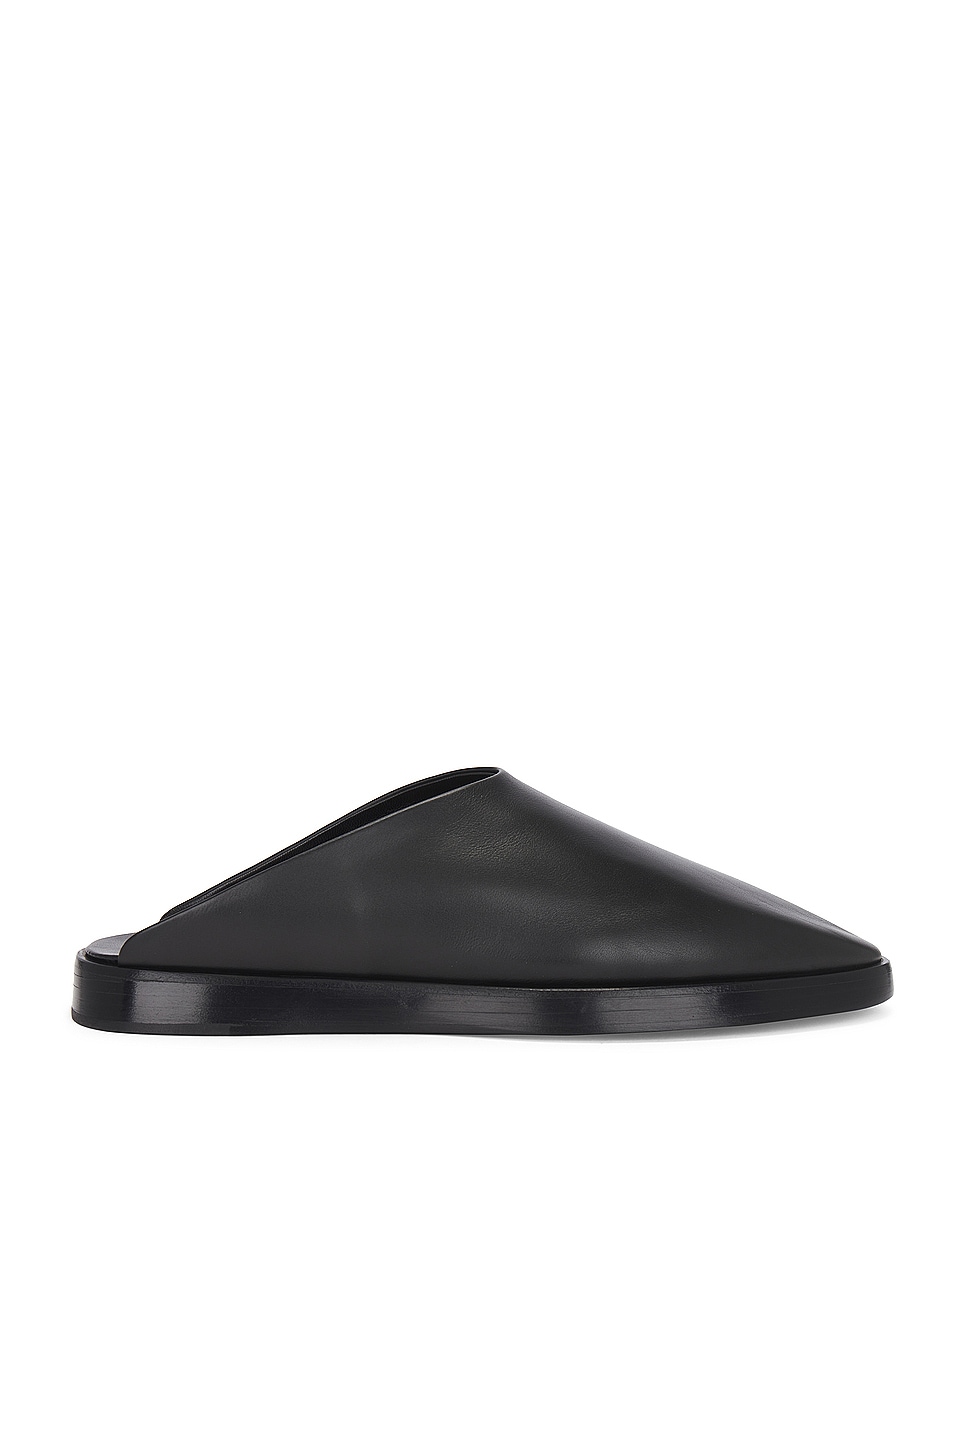 Image 1 of Fear of God Backless Mule in Black